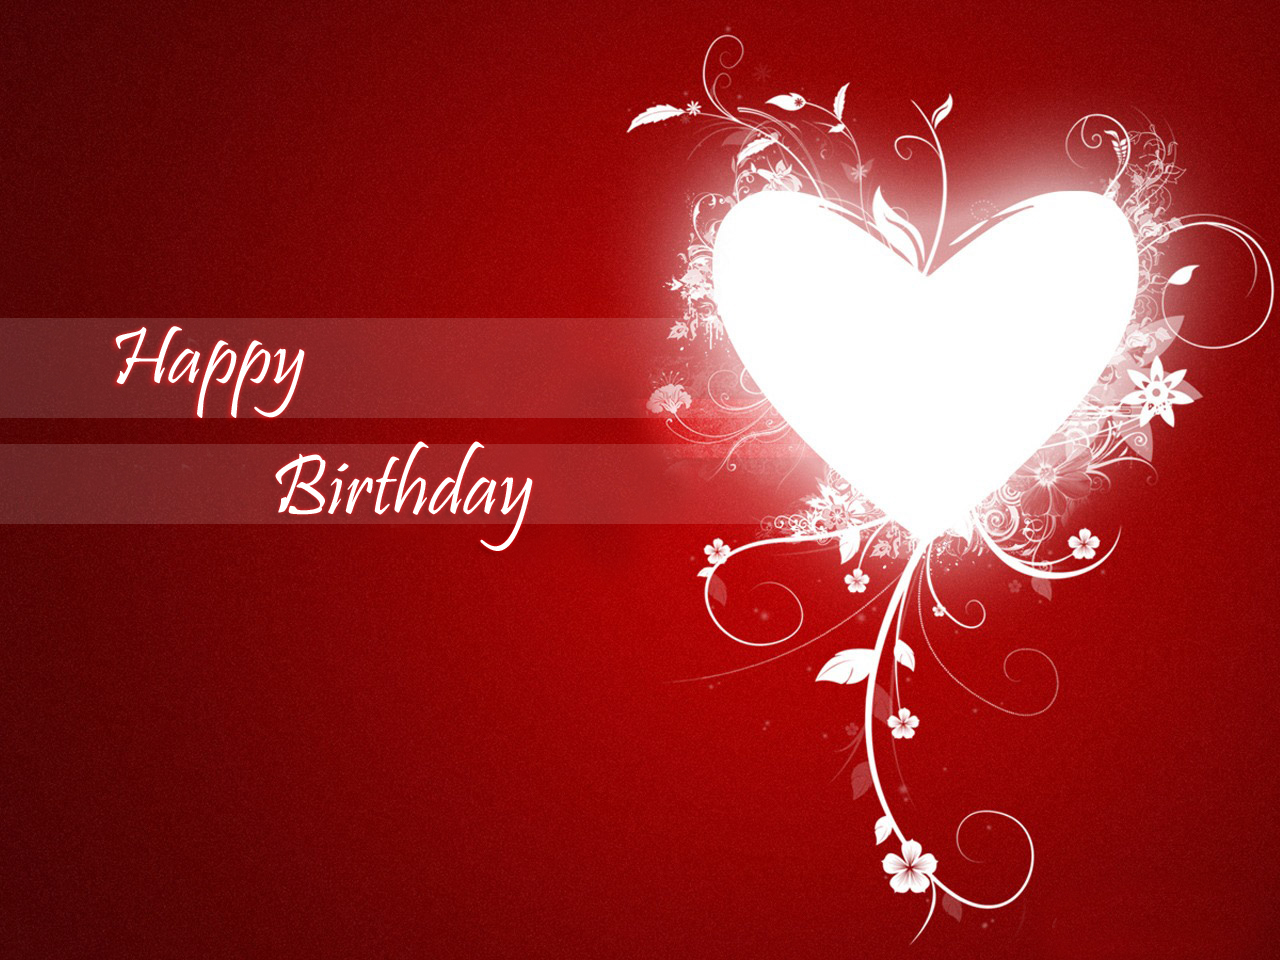 BirtHDay Love Messages With HD Wallpaper Fine